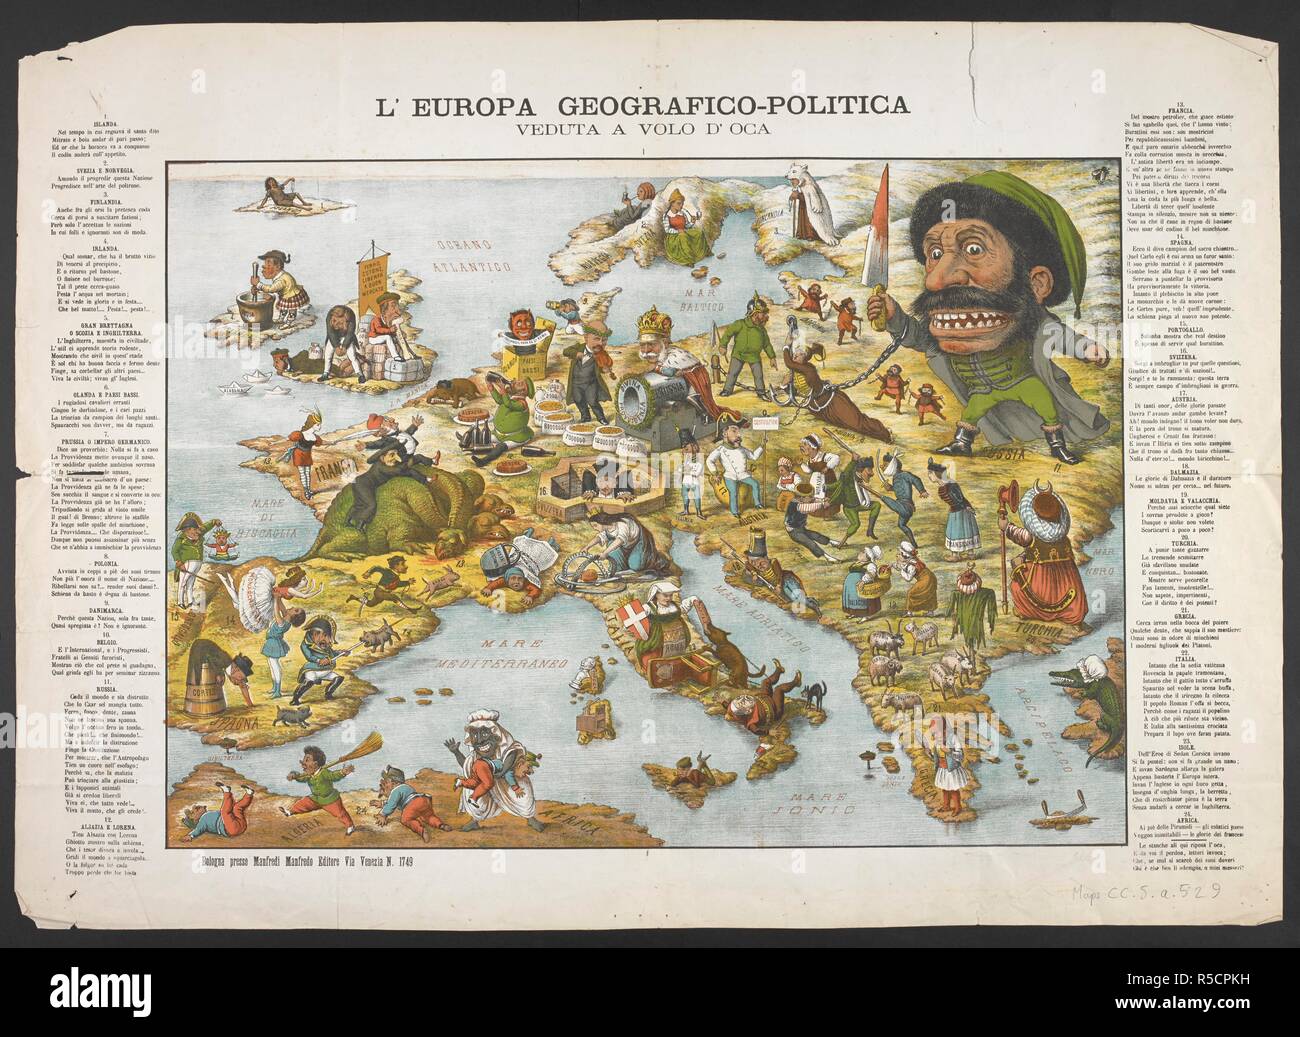 A political comic map of Europe with verse relating to nations.  References to Treaty of Frankfurt, and to relations between Italy and Papacy, suggests a date of 1871. L'Europa geografico-politica veduta a vola d'oca. Bologna : presso Manfredi Manfredo editore Via Venezia N. 1749, [ca. 1871]. 1 map : col ; 38 x 53 cm., on sheet 50 x 70 cm. Source: Maps.cc.5.a.529. Language: Italian. Stock Photo